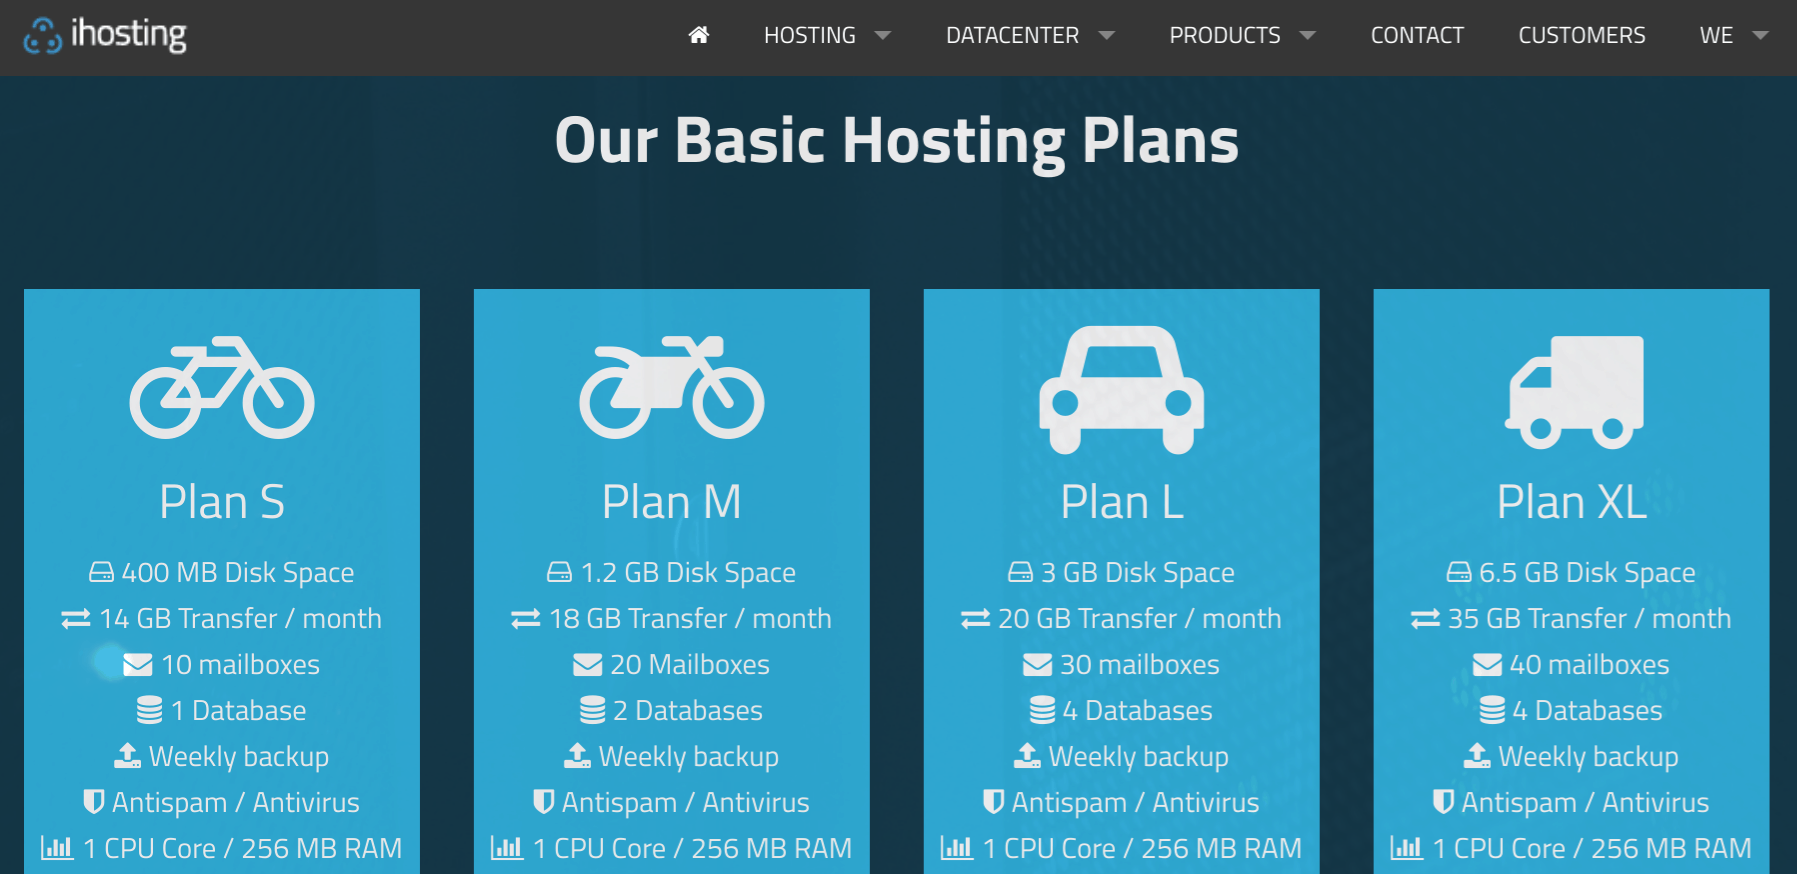 iHosting overview1